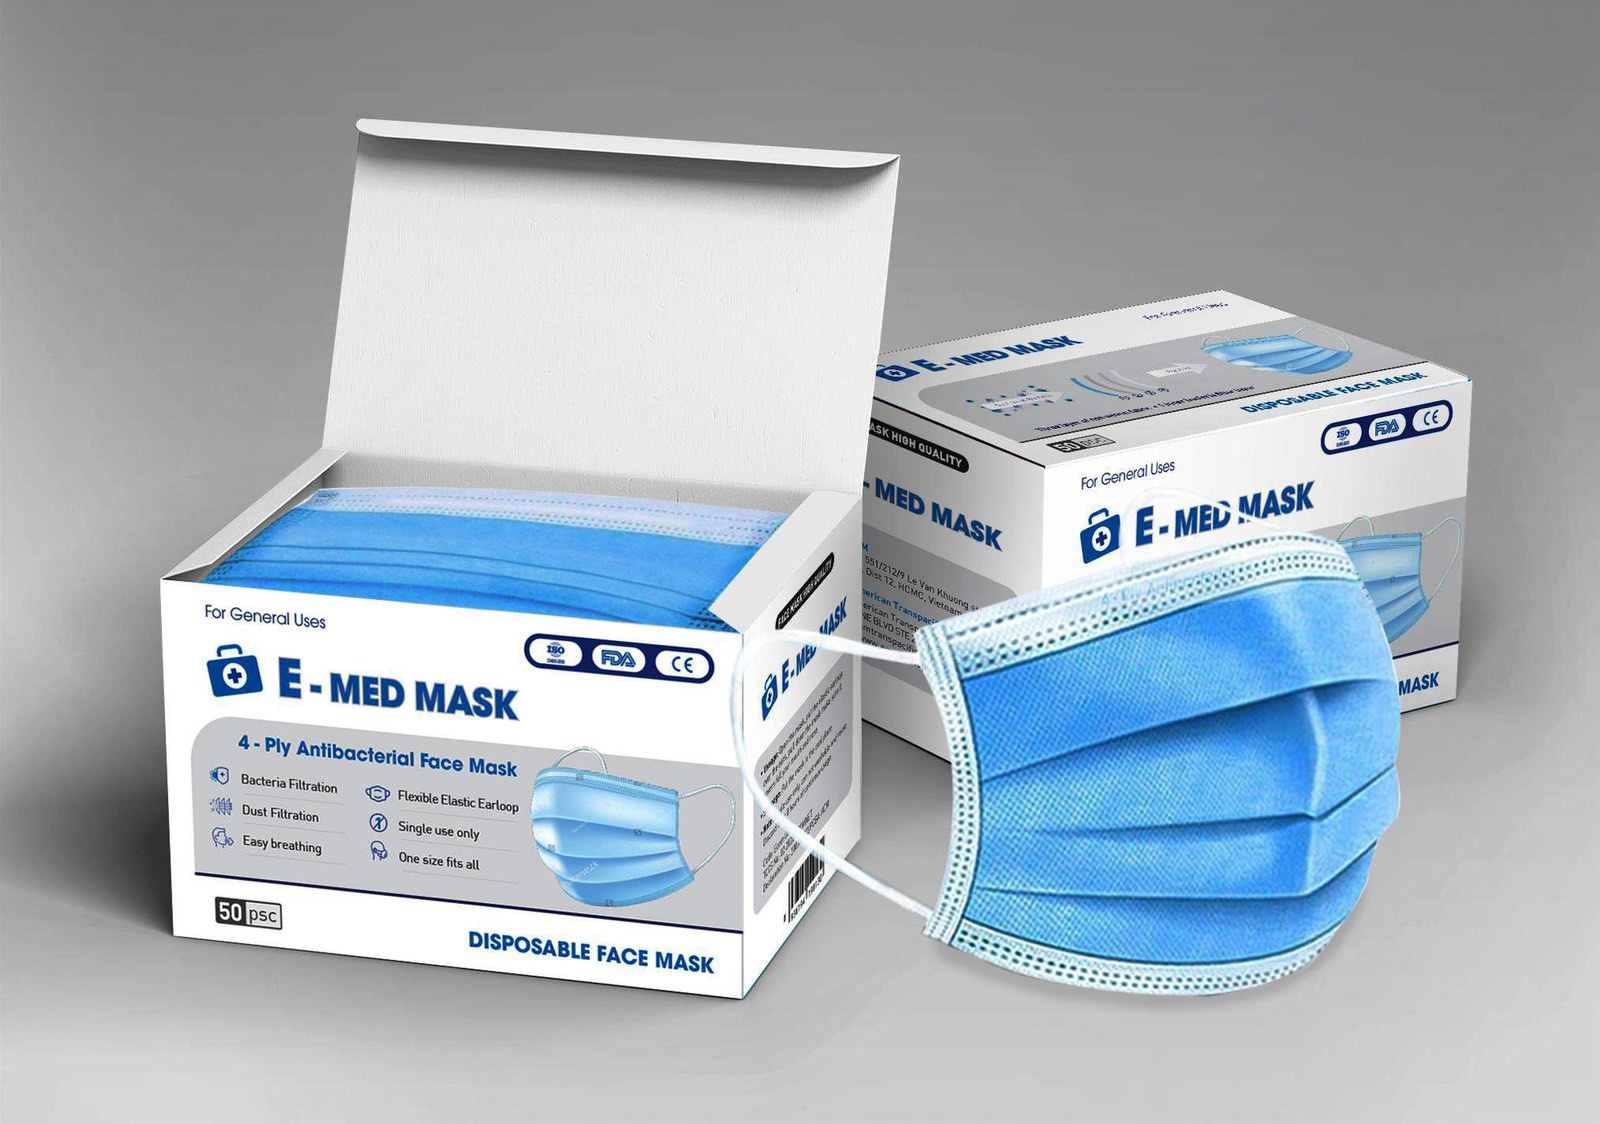 Buying Surgical Mask Wholesale price how much quality guarantee?